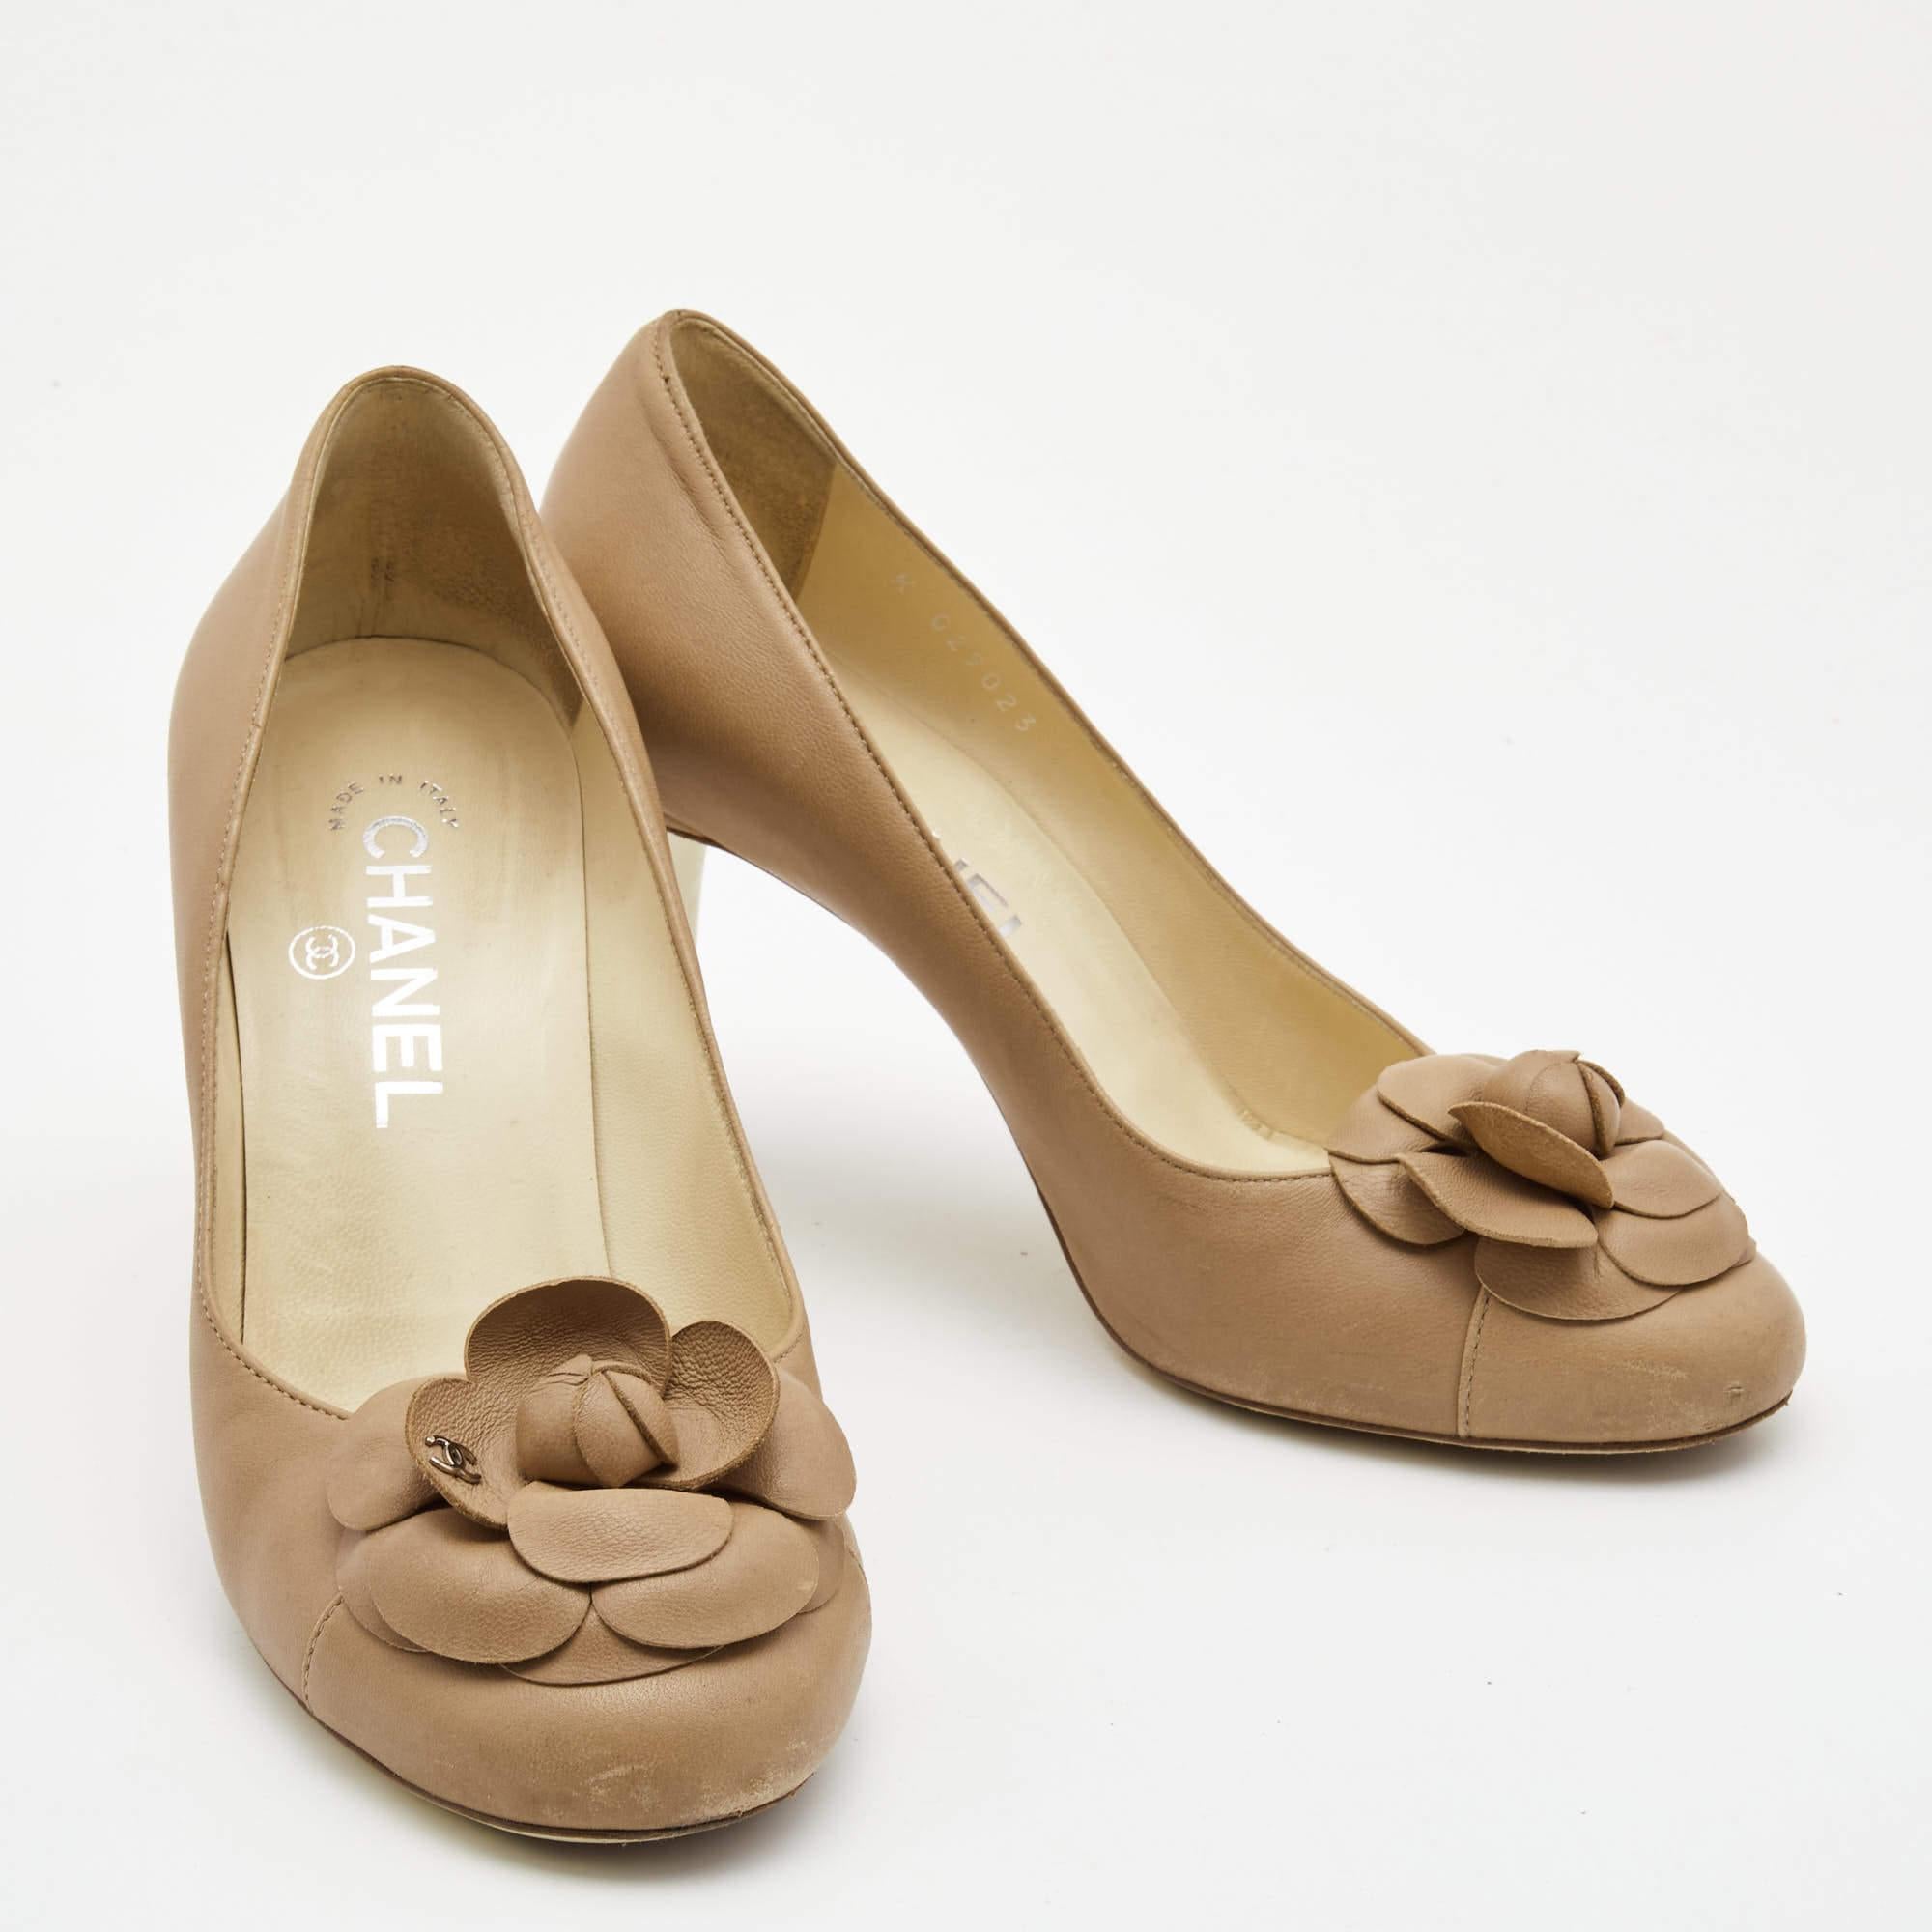 Exuding a fine blend of luxury and elegance, these Chanel pumps come crafted from leather. They are designed with round toes, a signature Camellia applique with the CC logo on the vamps, and sturdy heels. The pumps are excellently made to offer you